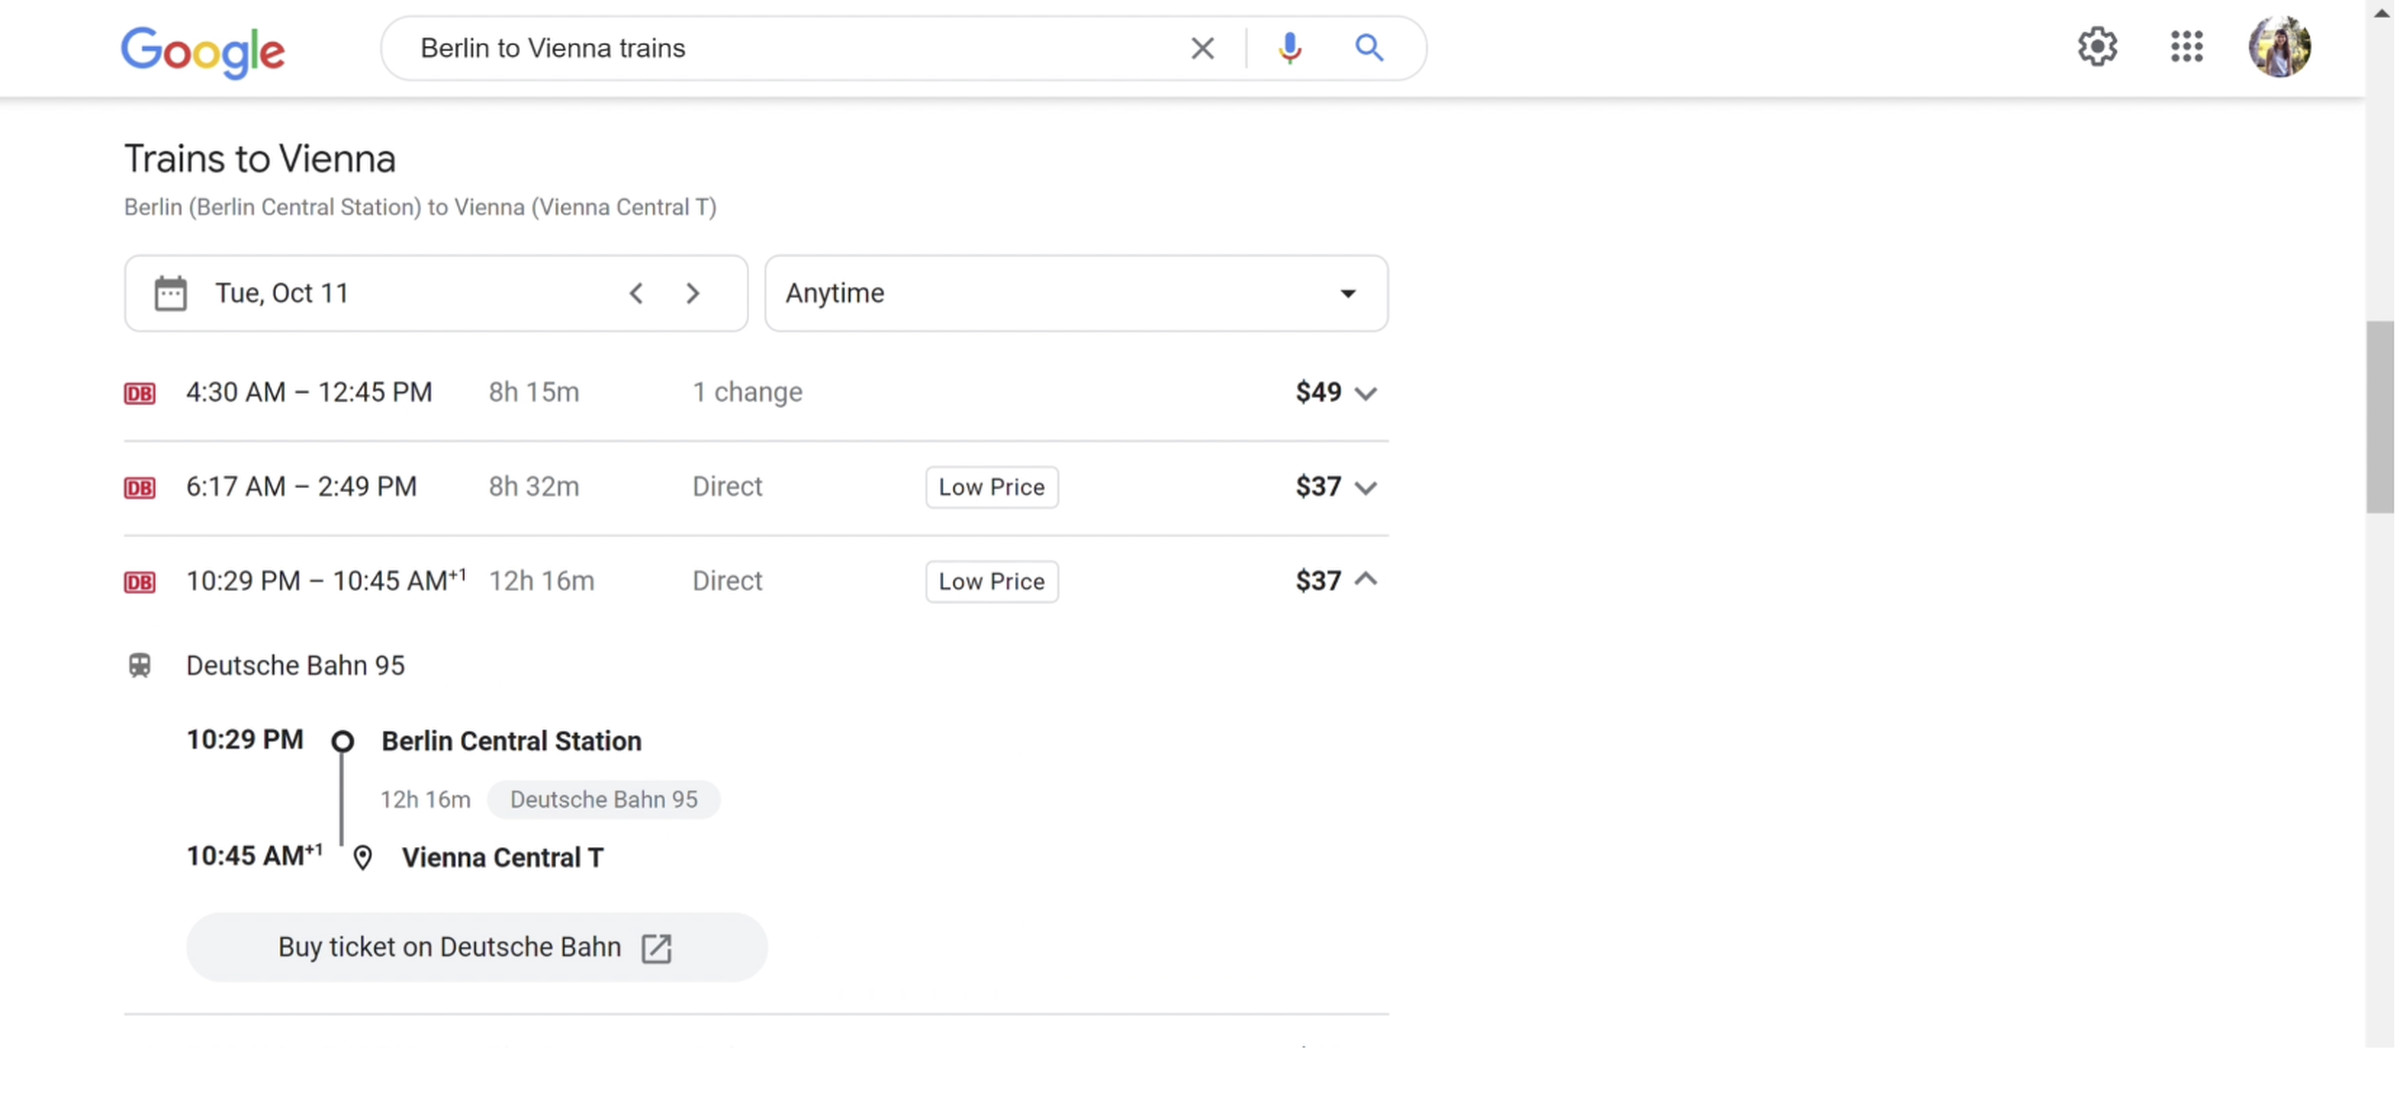 Train ticket options in Google search